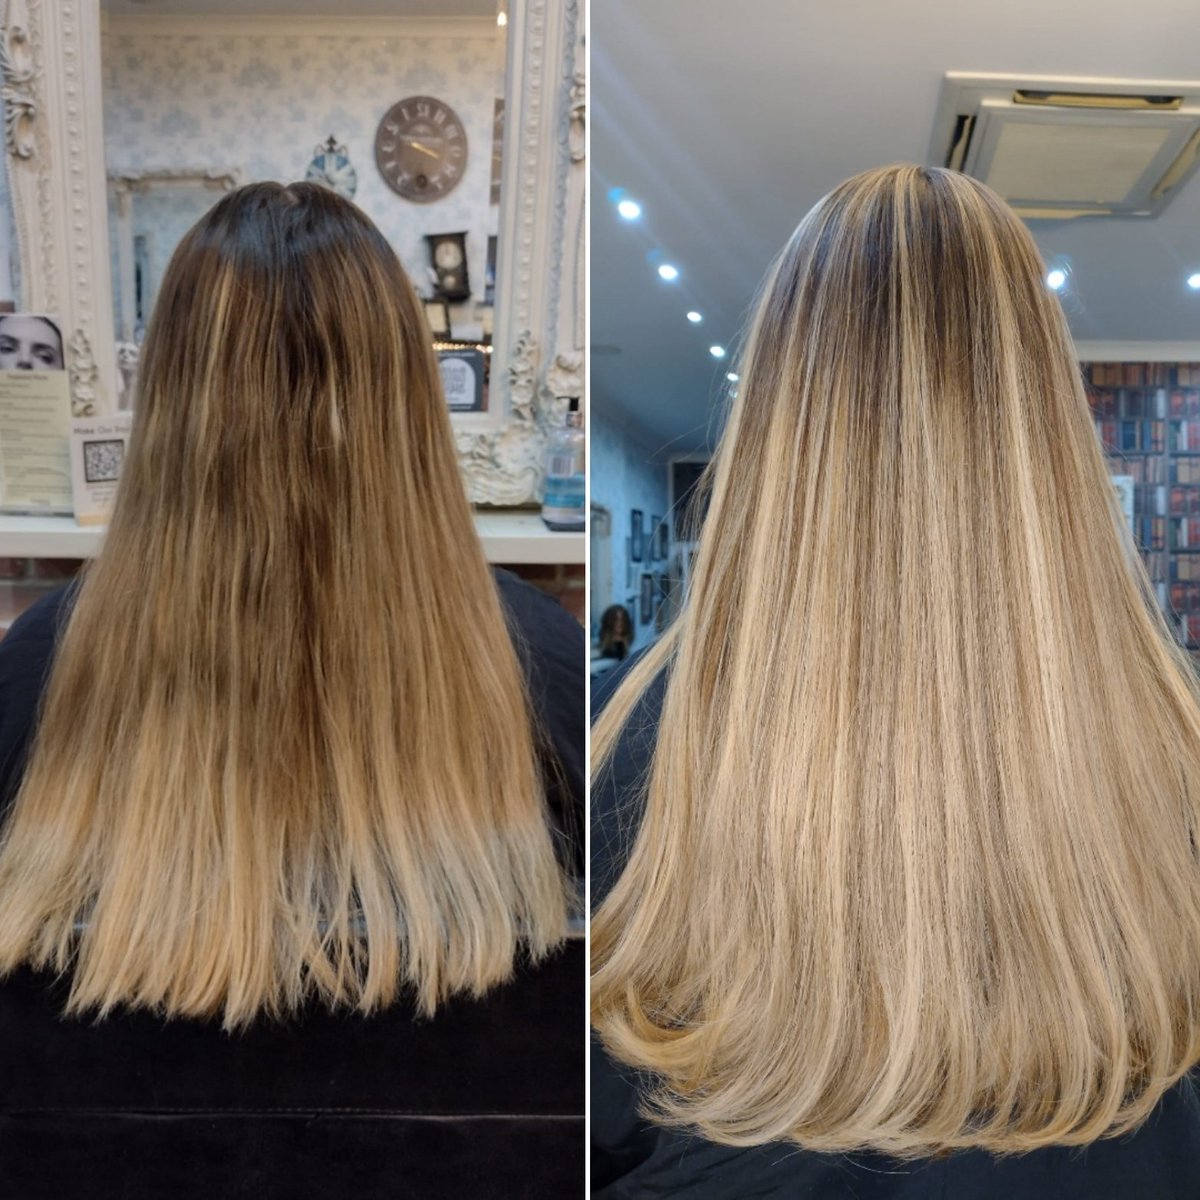 Correctional colour service: Our goal was to create a brighter, cleaner blonde on mid-lengths and ends and remove banding. Danielle used a combination of foilyage and freehand painting to achieve a seamless blend ✨ 
#Blonde #Balayage #Foilyage #BlondeSpecialist #ColourCorrection